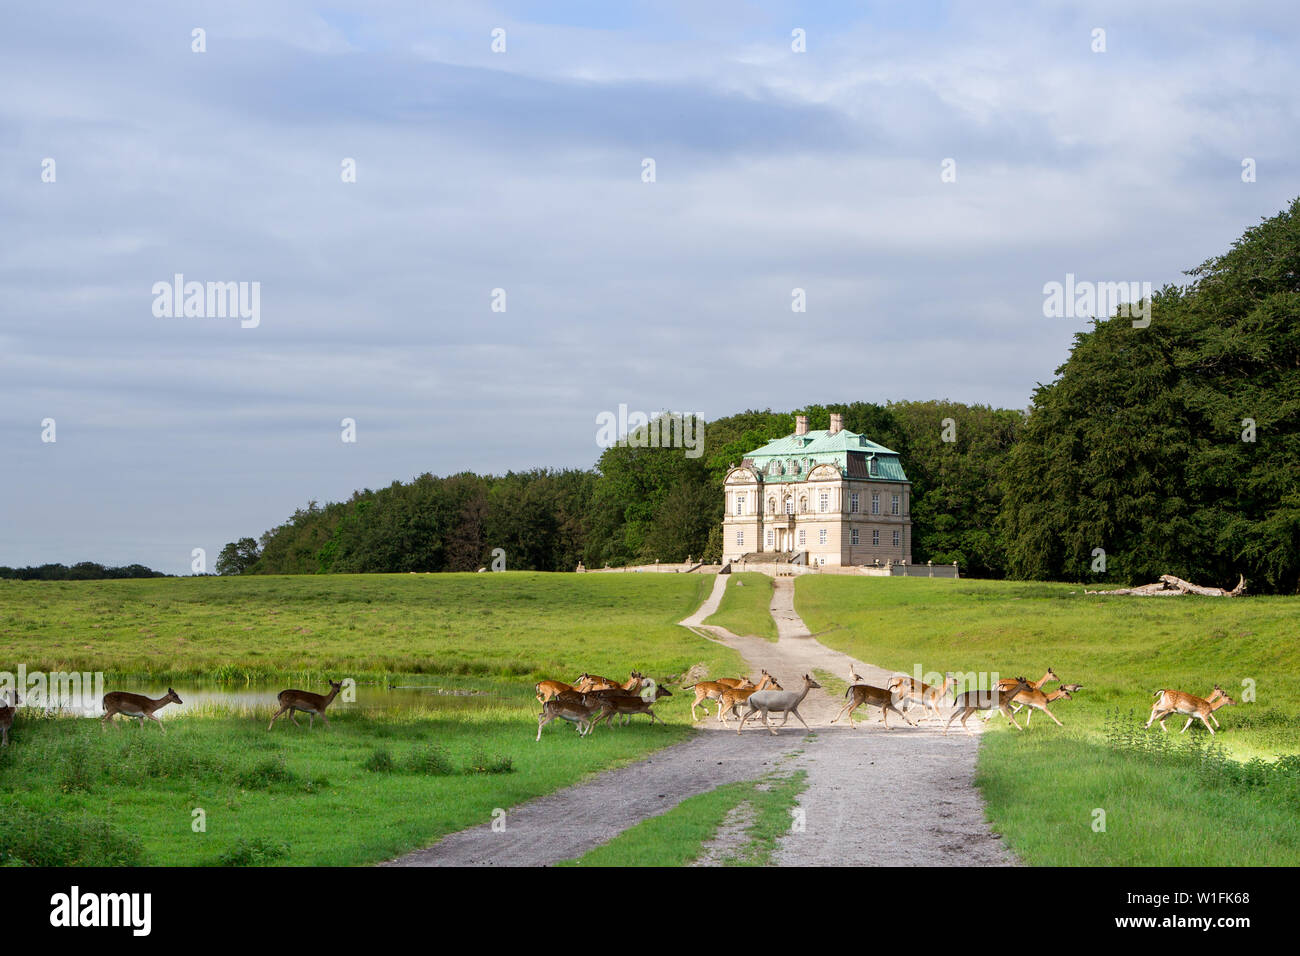 The Hermitage, a royal hunting lodge in Klampenborg of Denmark. Dyrehaven is a forest park north of Copenhagen. Stock Photo